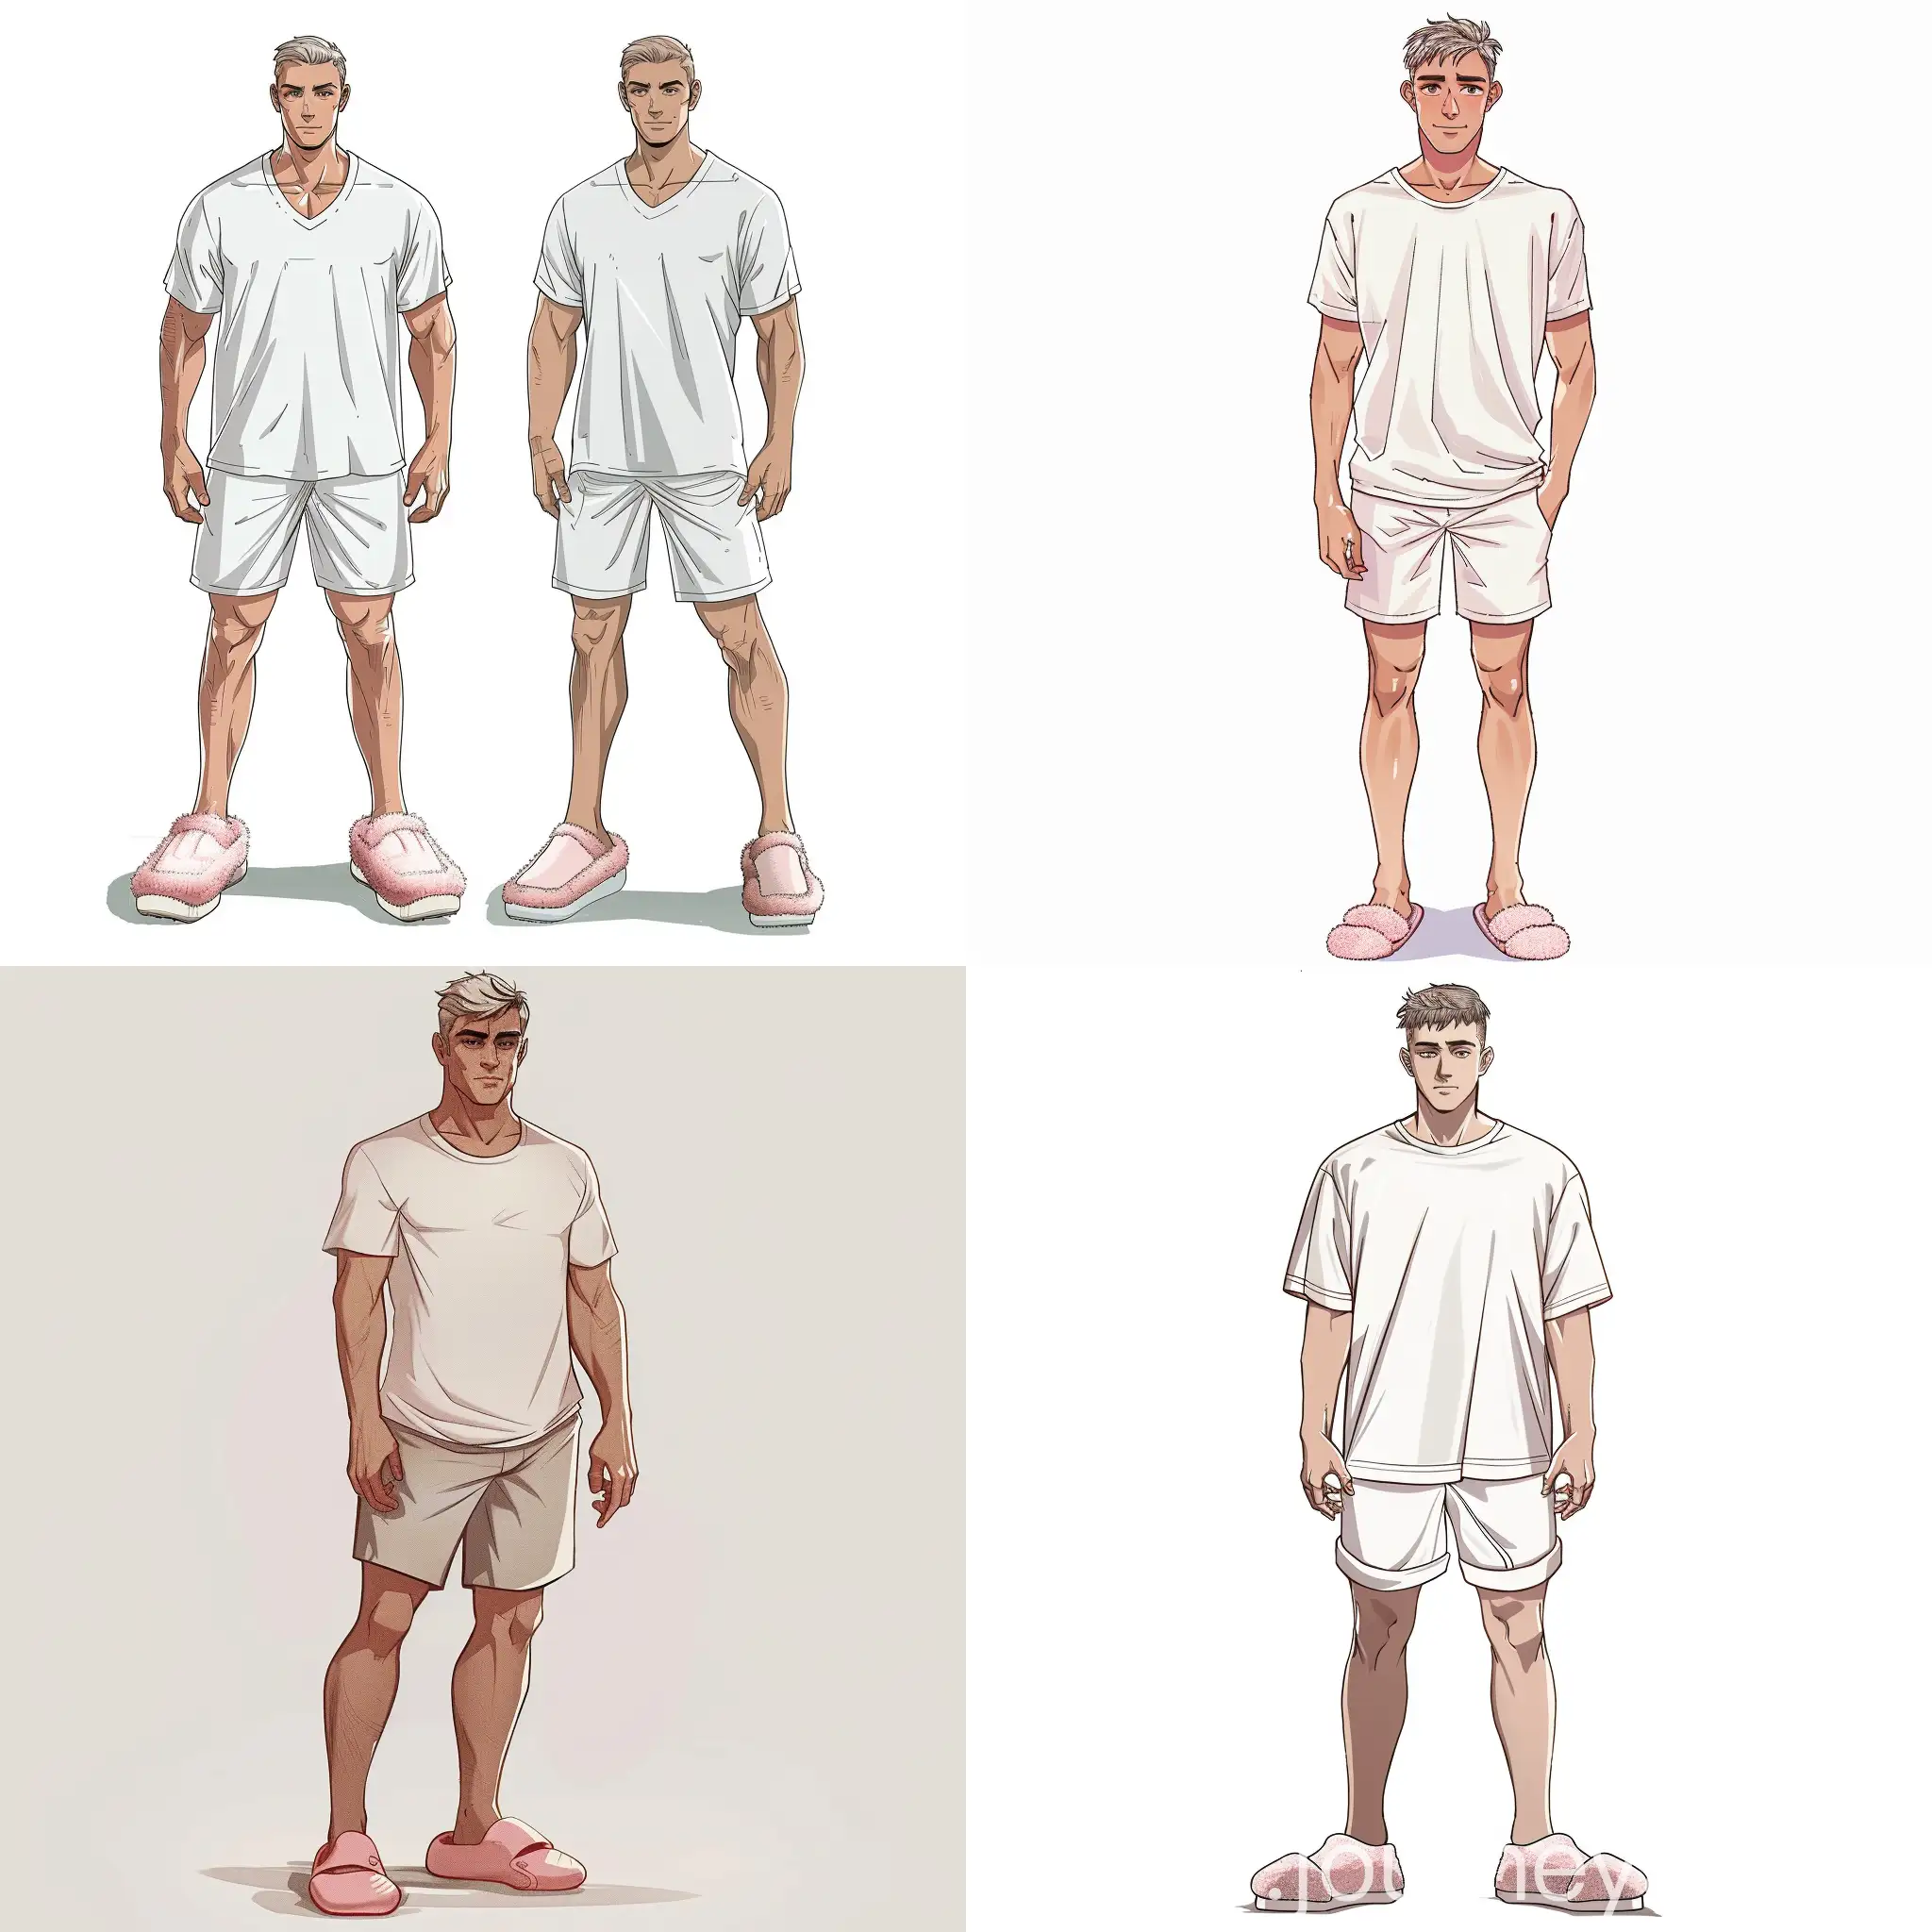 Athletic-Man-in-Casual-Home-Attire-Illustration